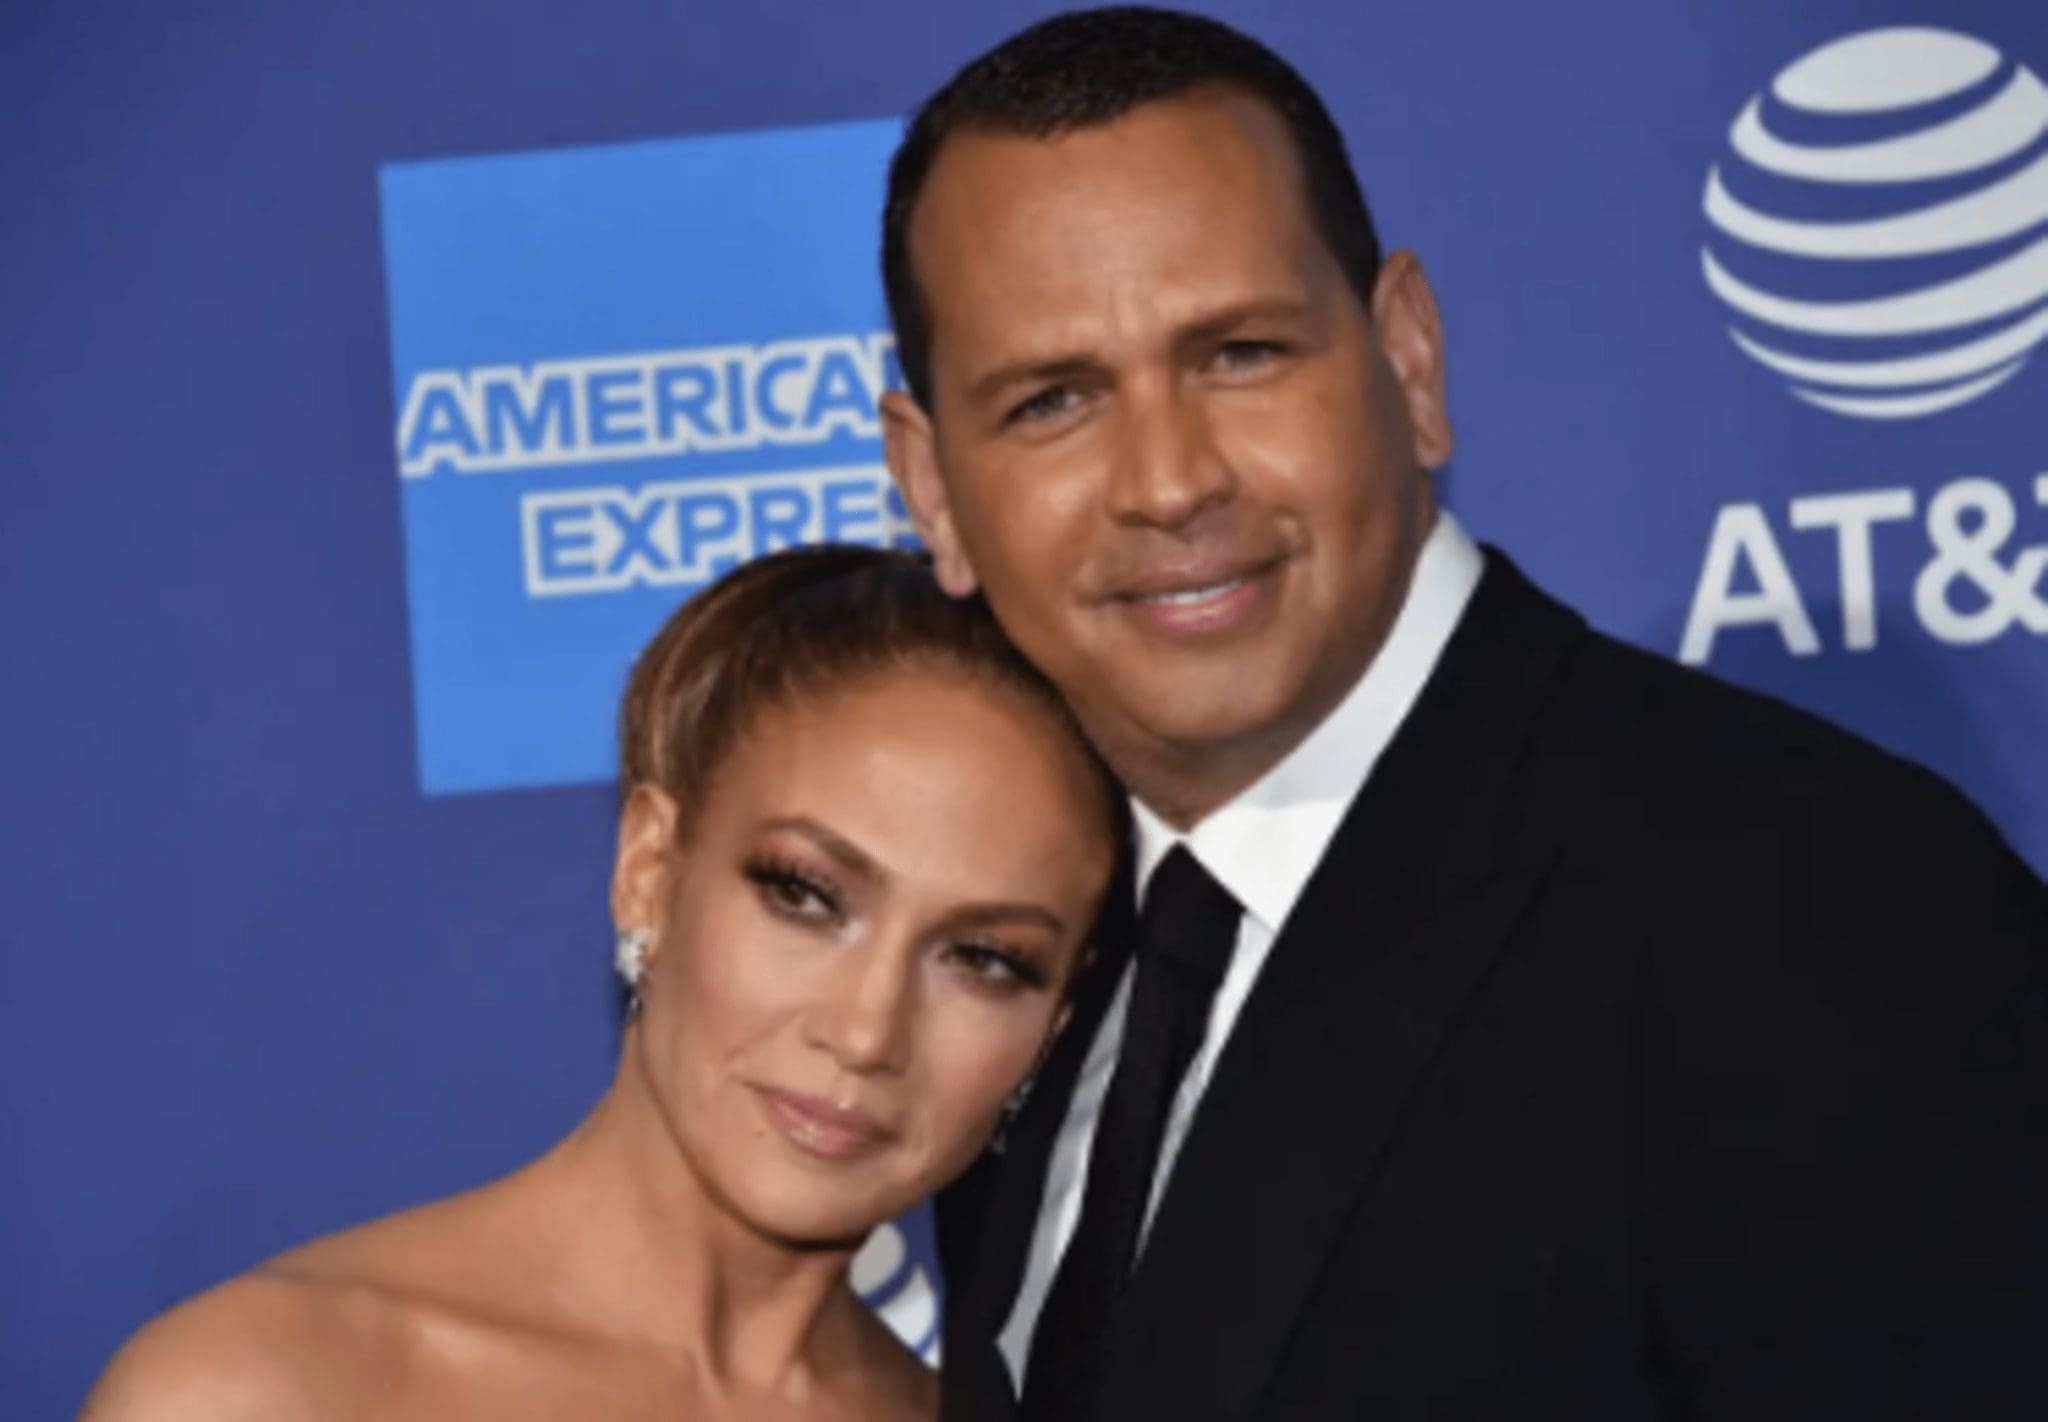 Following her wedding, Alex Rodriguez offered his warmest greetings to Jennifer Lopez.